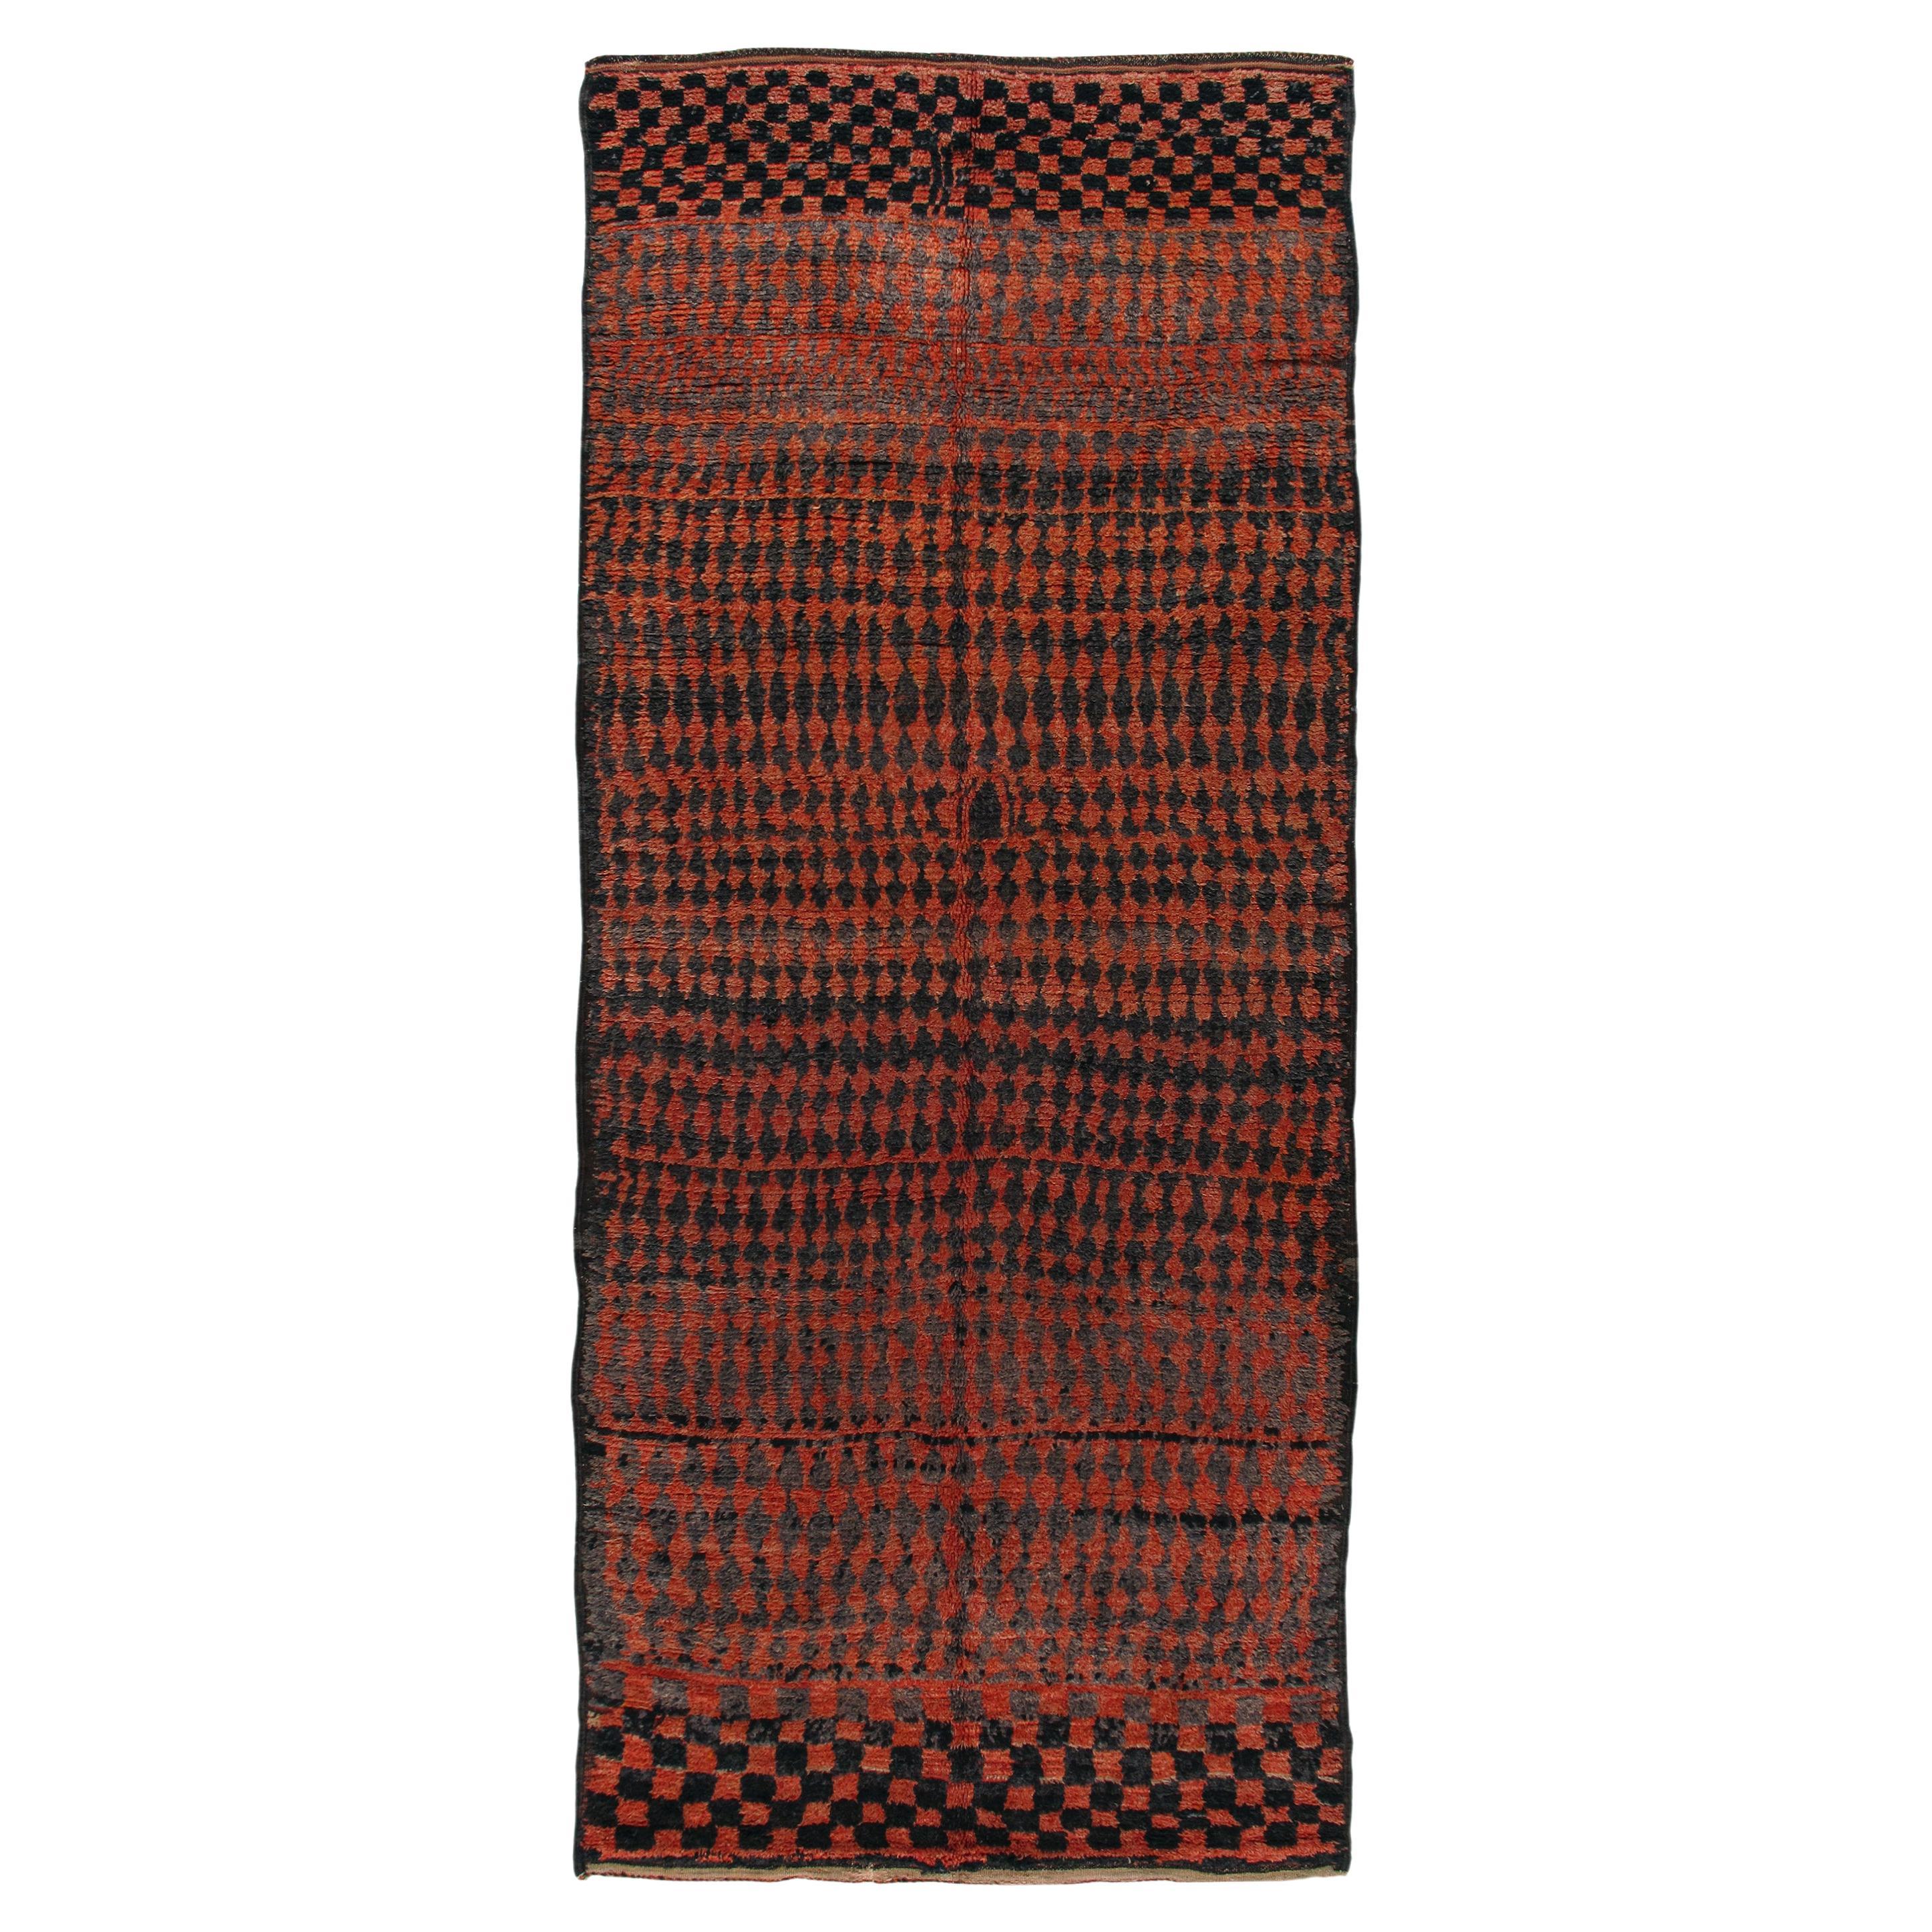 Vintage Moroccan Berber Hand Knotted Rug in Red and Black Checkered Design For Sale